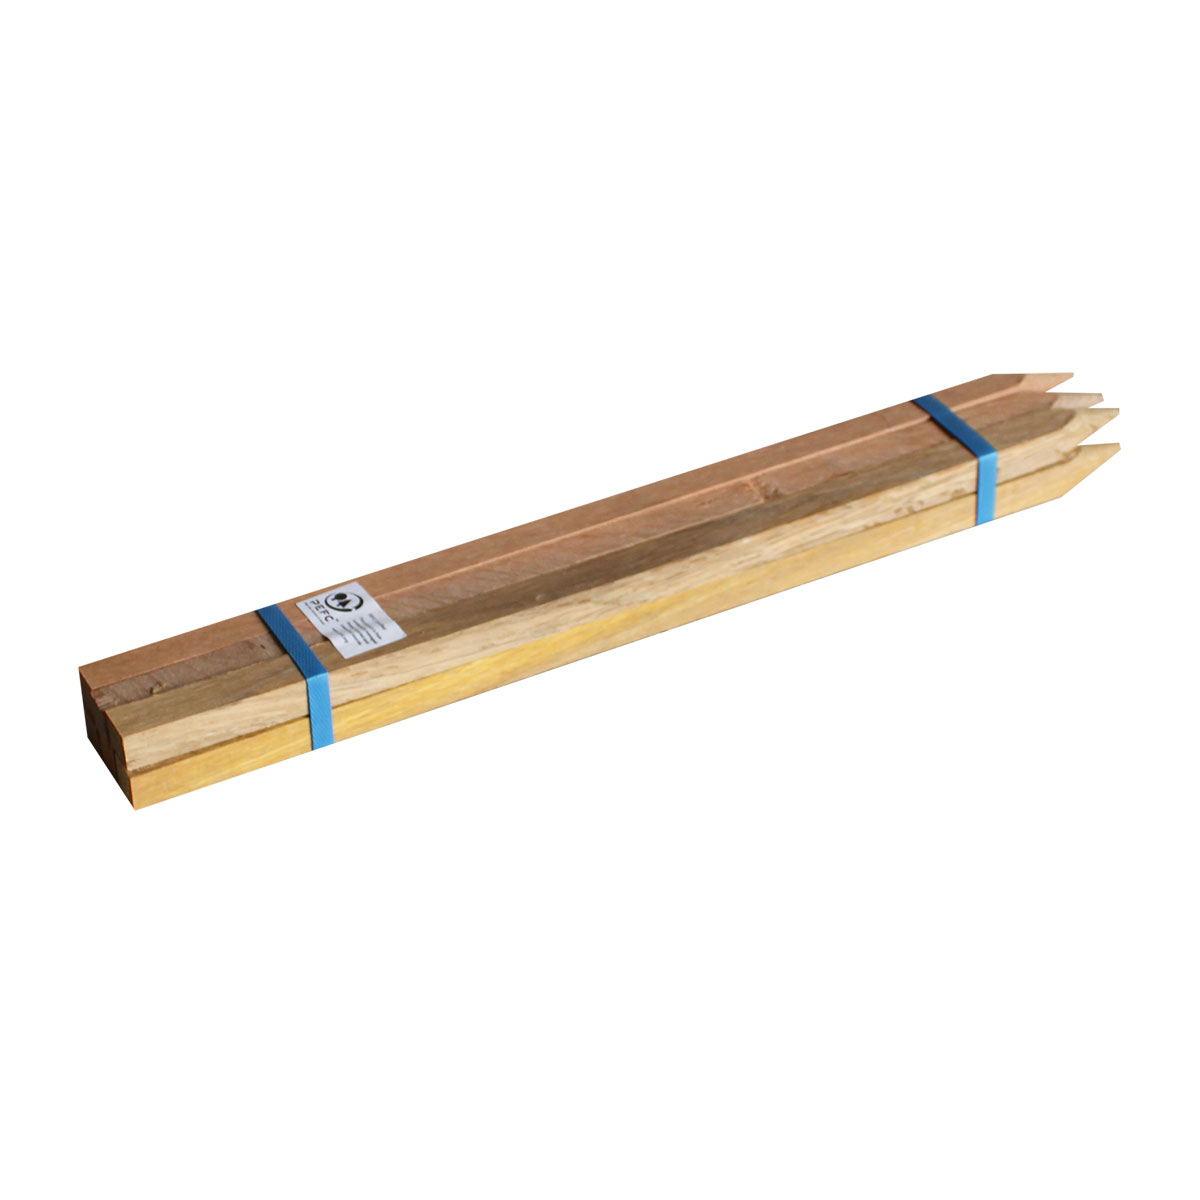 Hardwood Stakes 25 x 25 x 600mm - 6 Pack